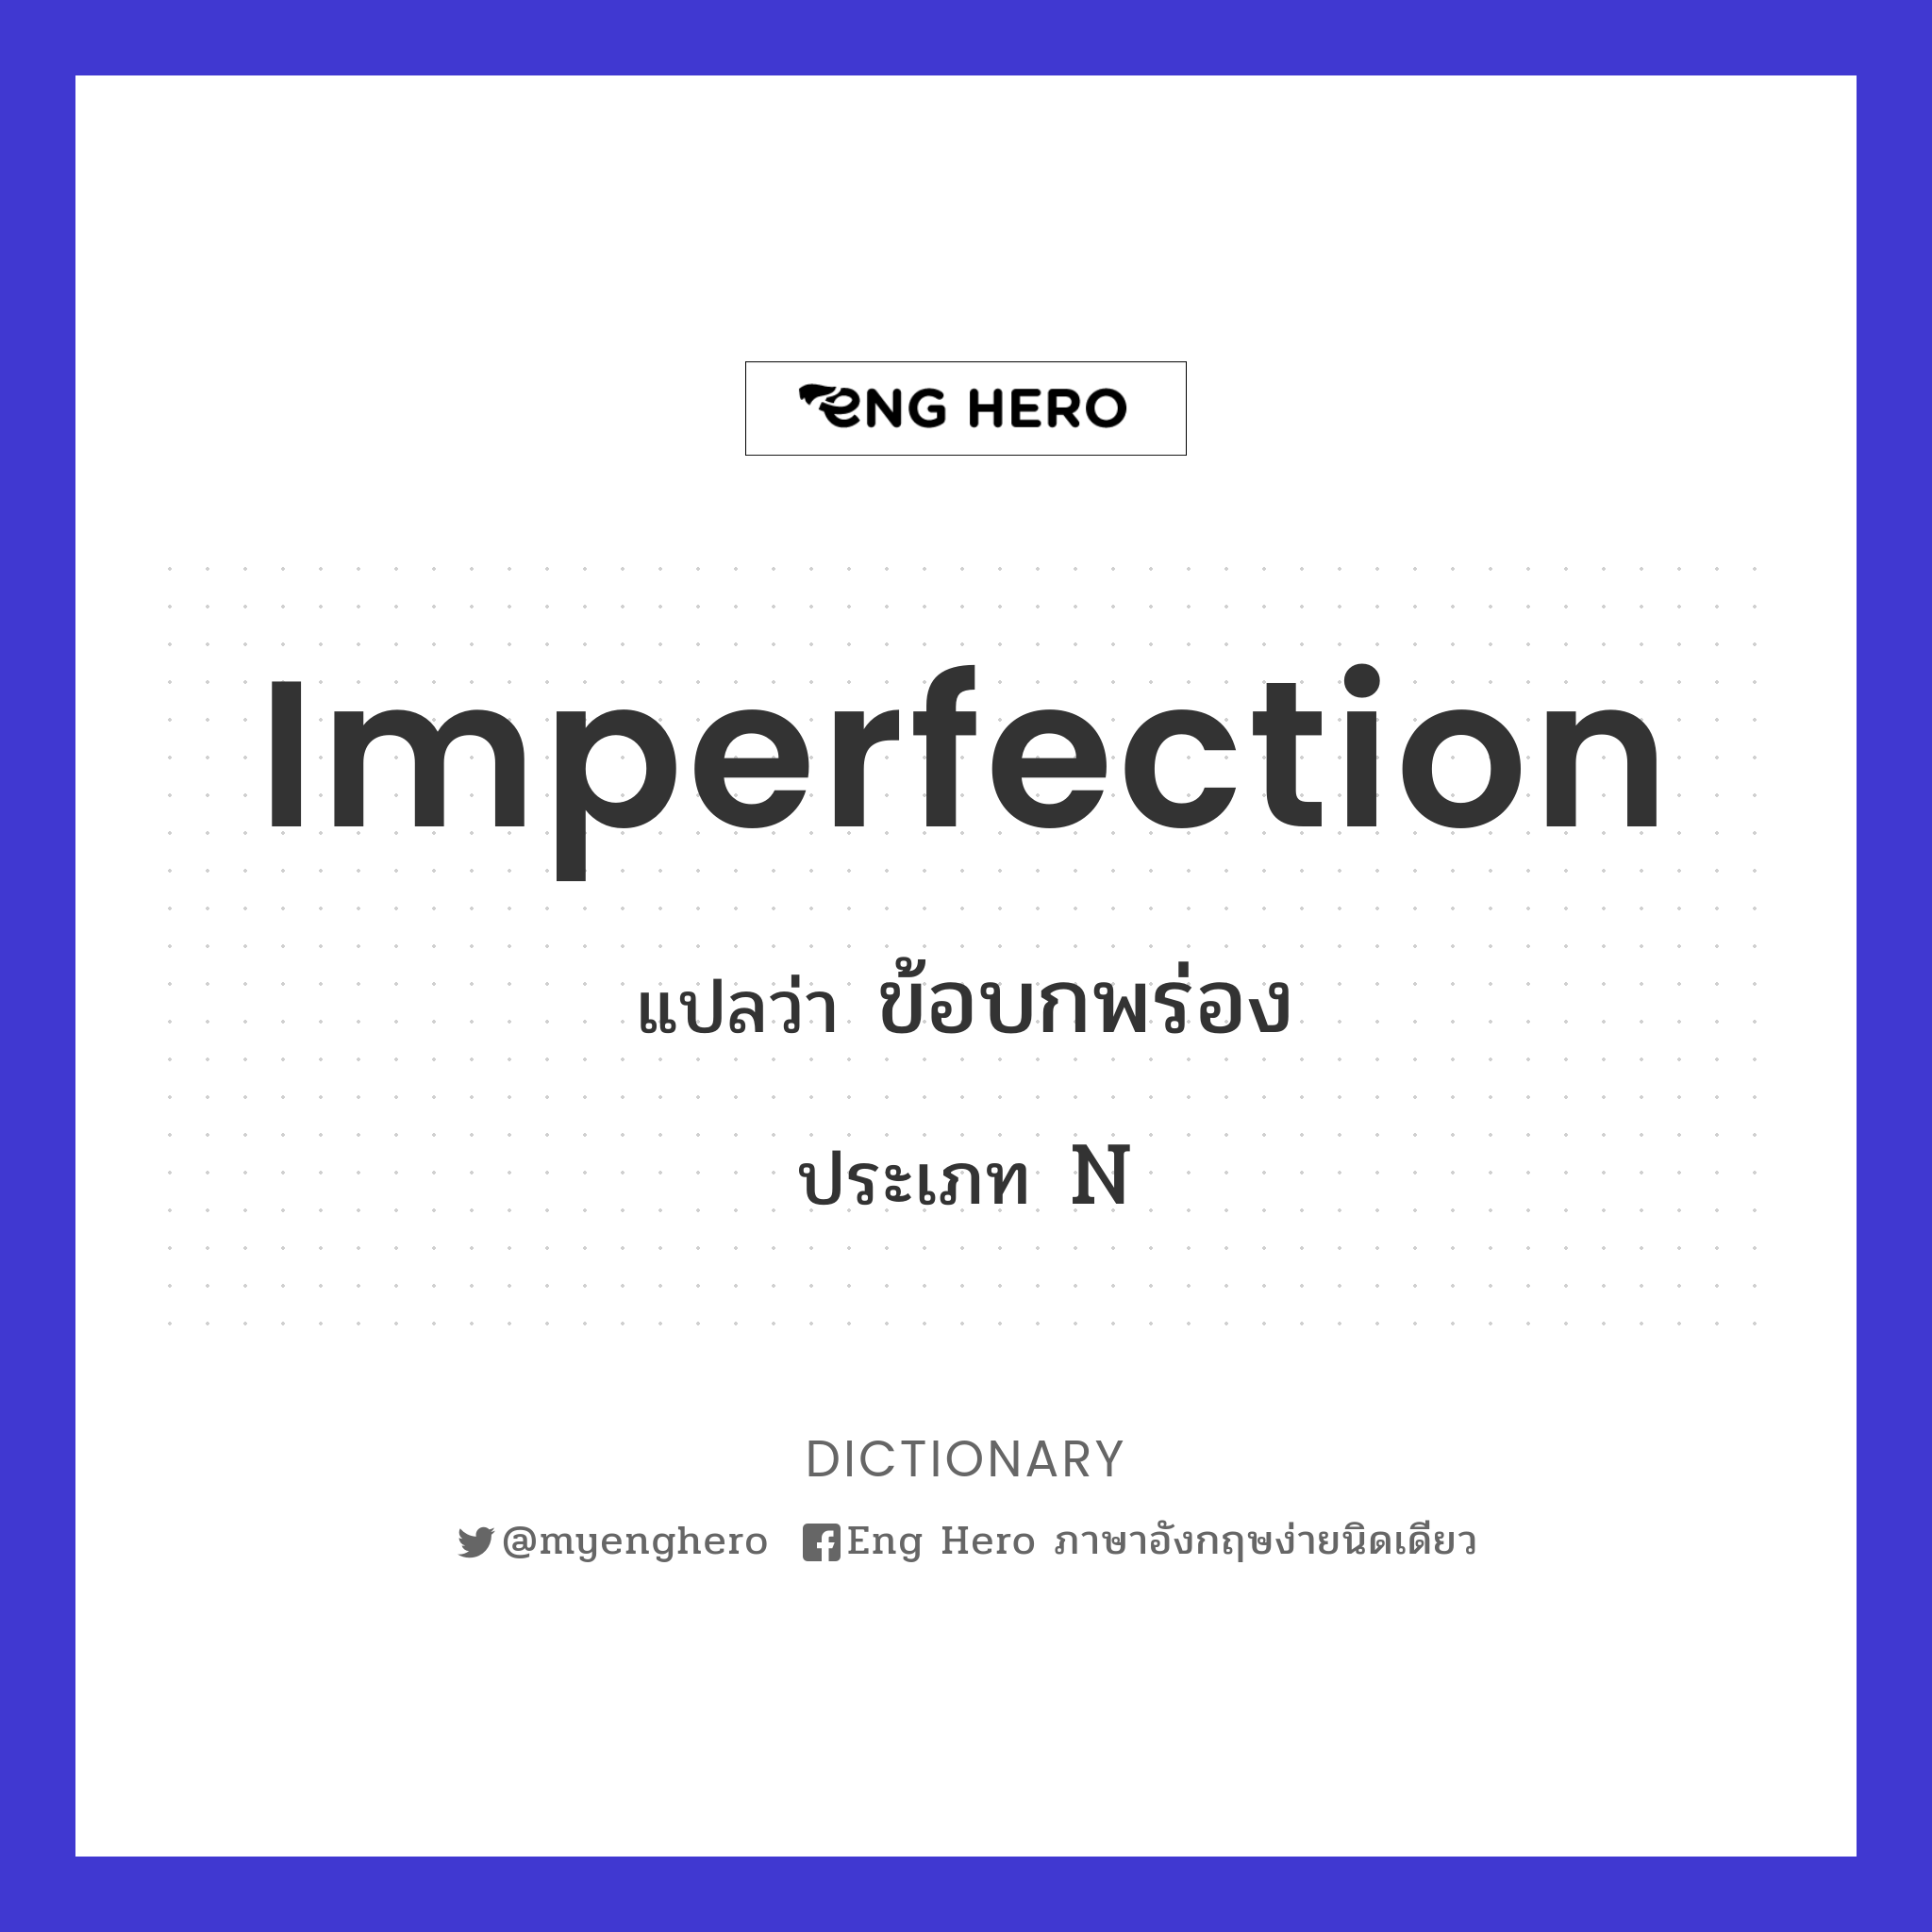 imperfection